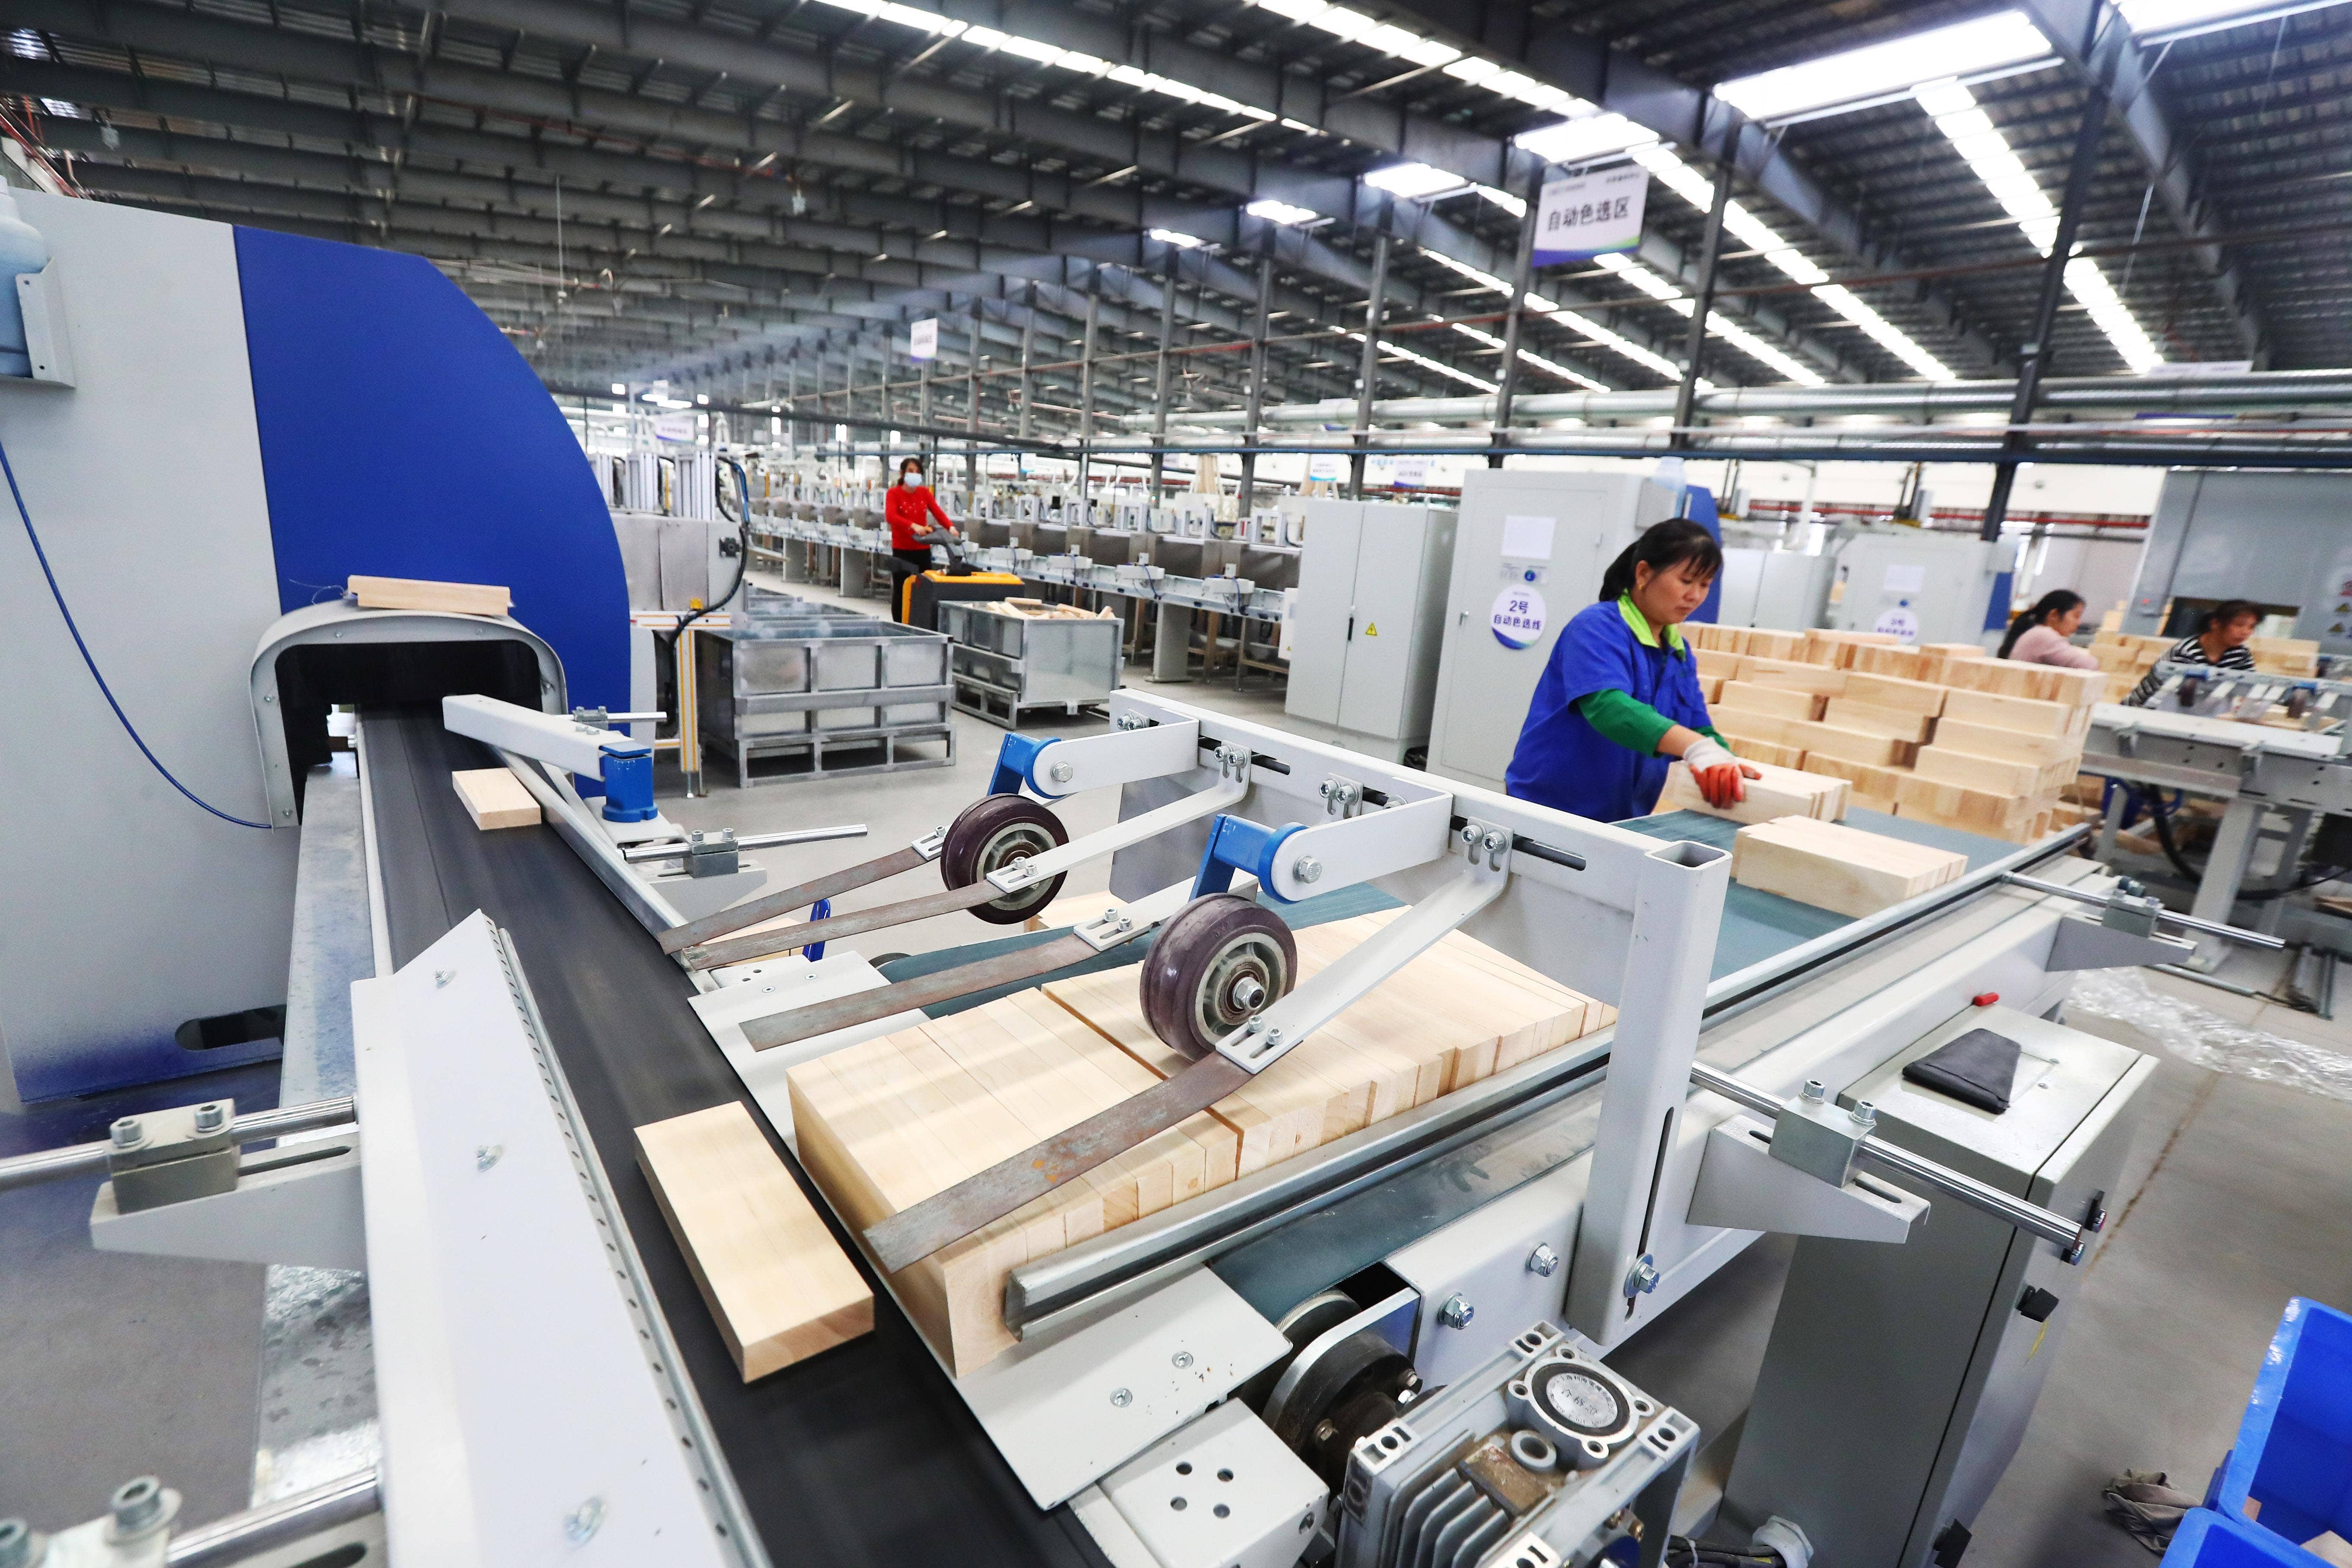 Employees work at an intelligent furniture factory using 5G and artificial intelligence technologies on Oct. 21, 2020, in Ganzhou, Jiangxi Province of China. (Liu Zhankun/China News Service via Getty Images)